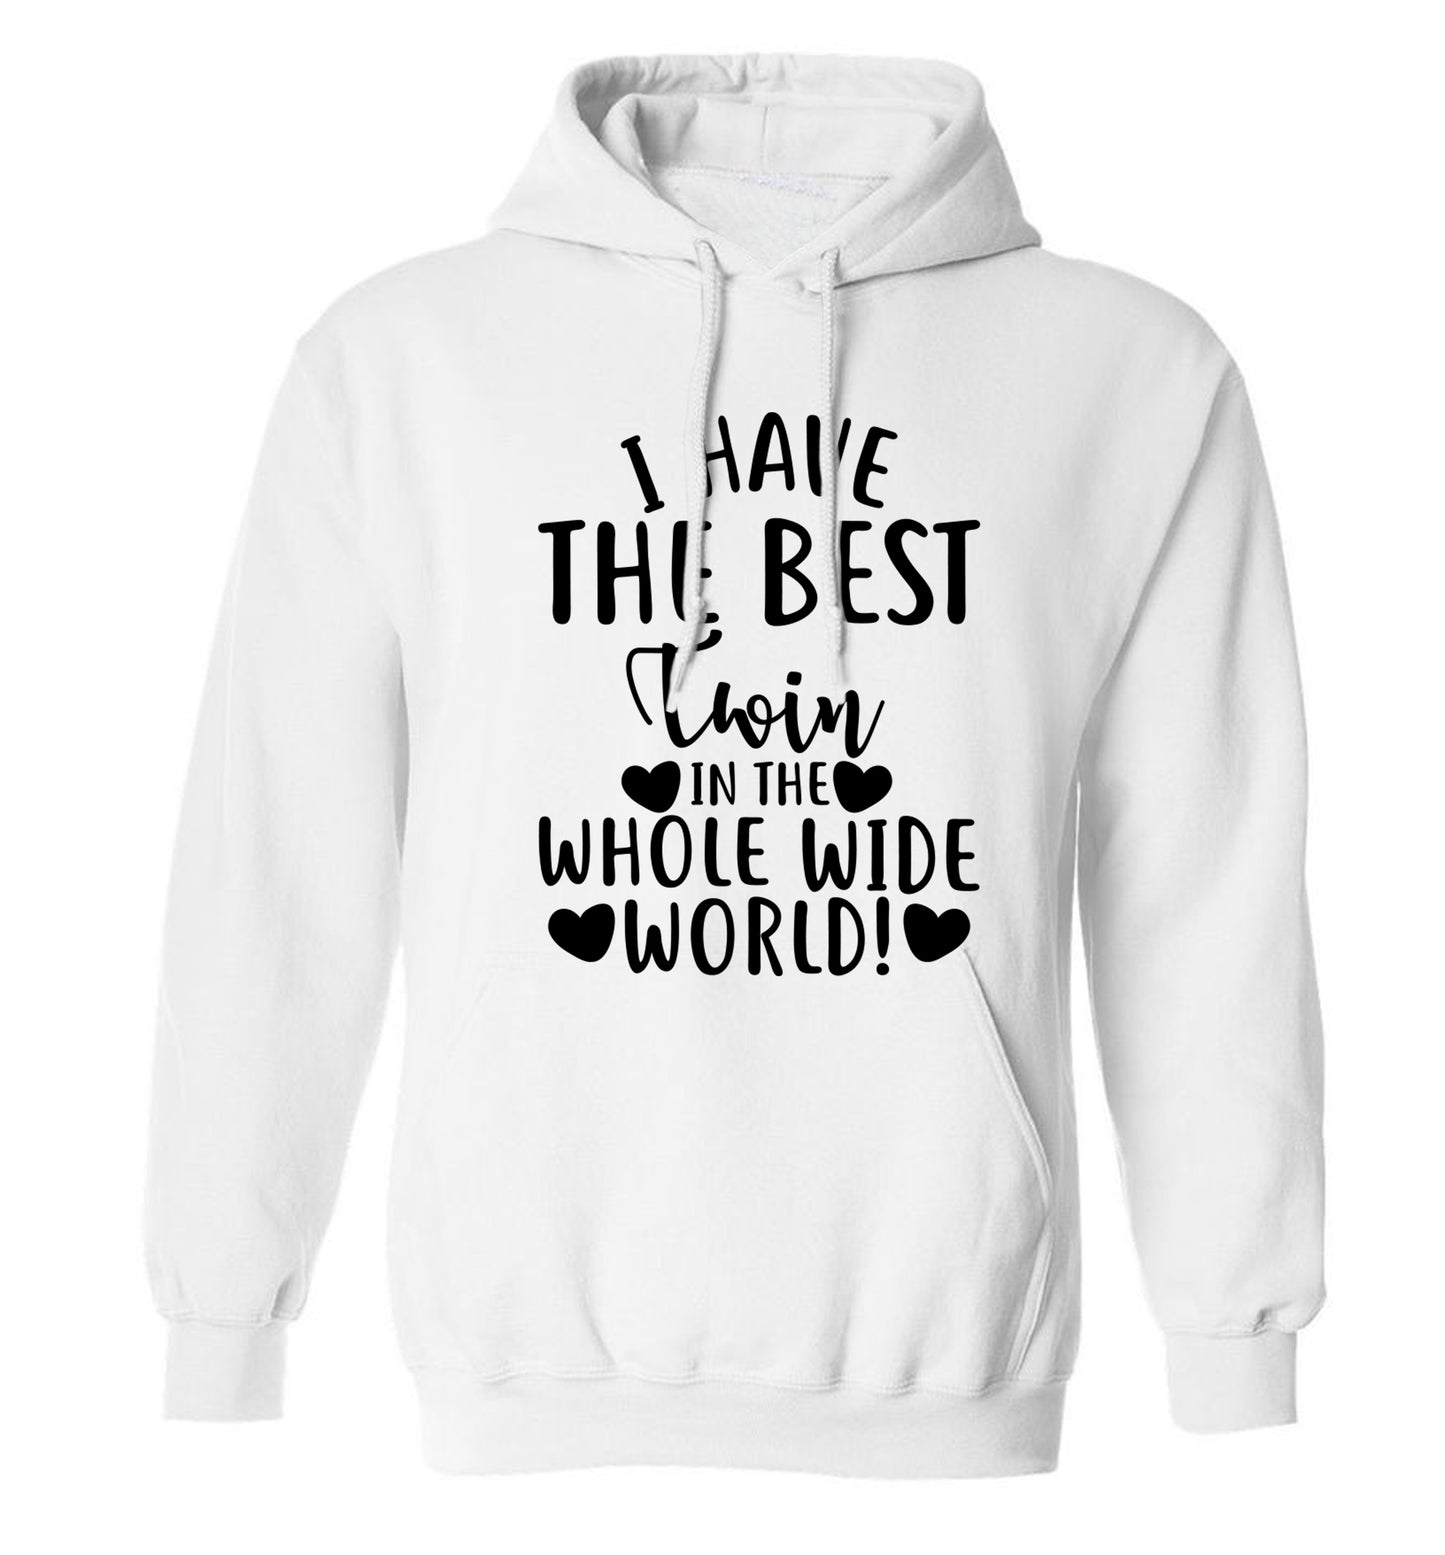 I have the best twin in the whole wide world! adults unisex white hoodie 2XL